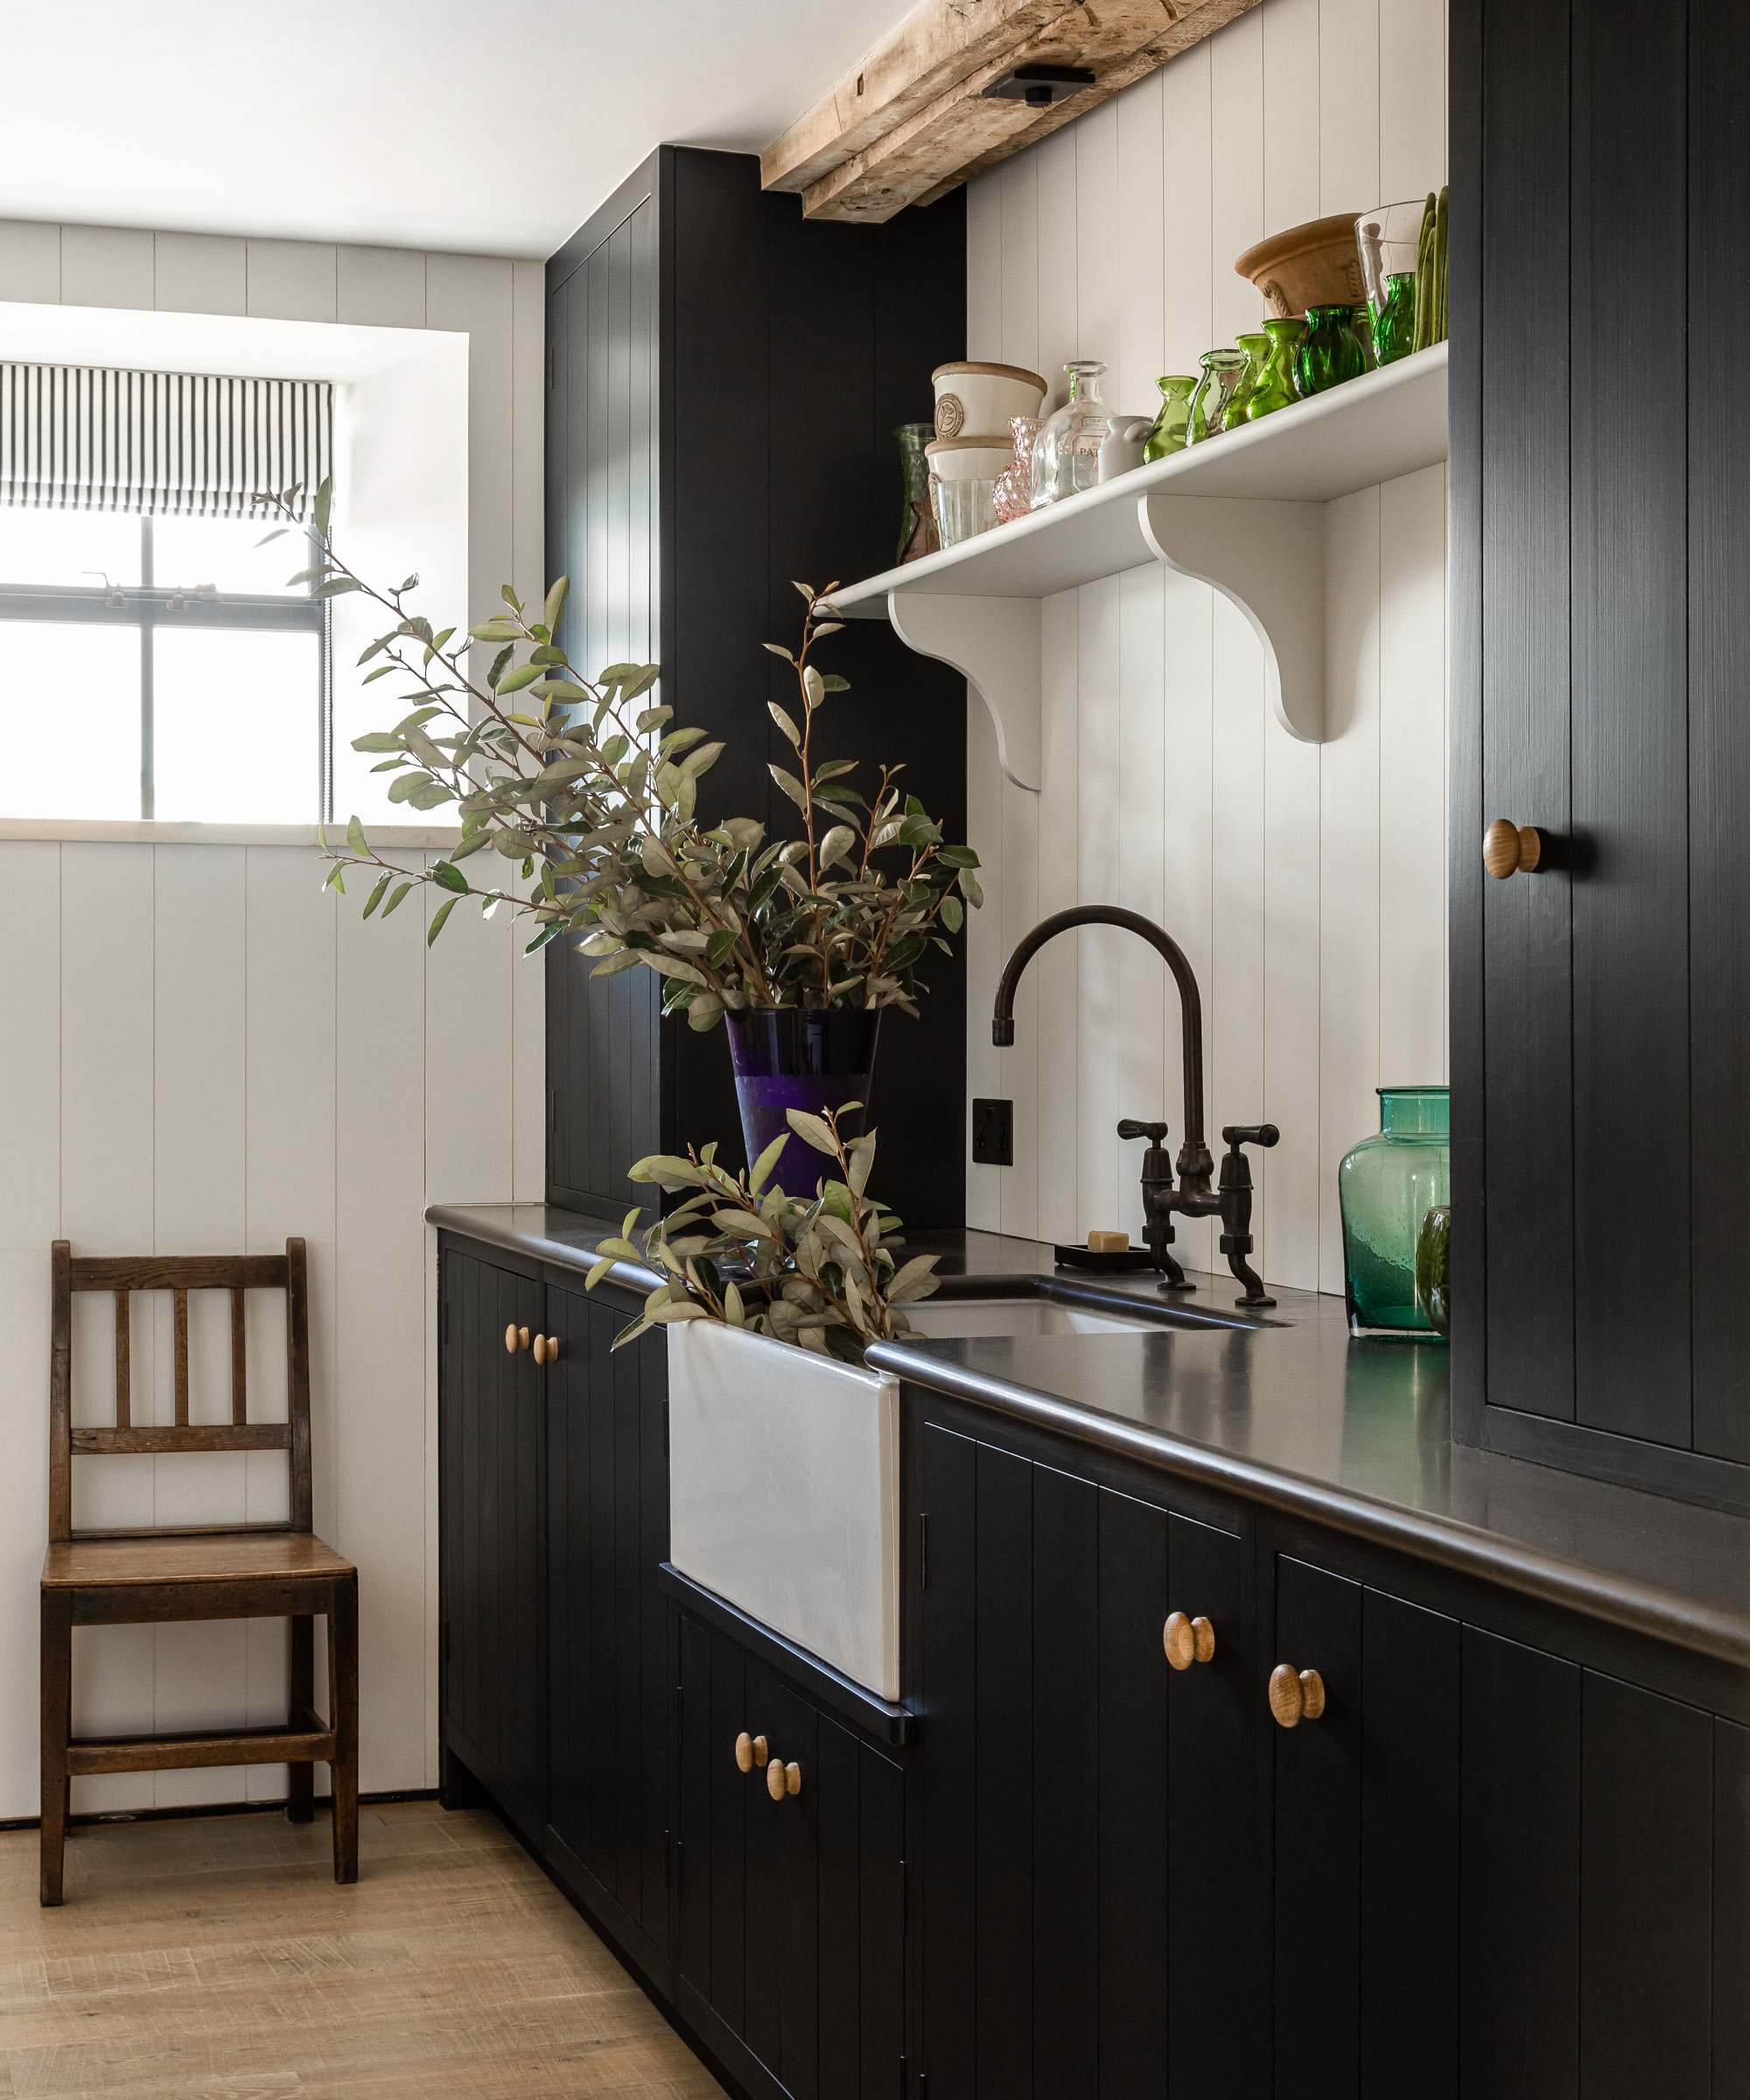 A utility room with black cabinetry and white walls in a 19th century Dorset barn conversion.